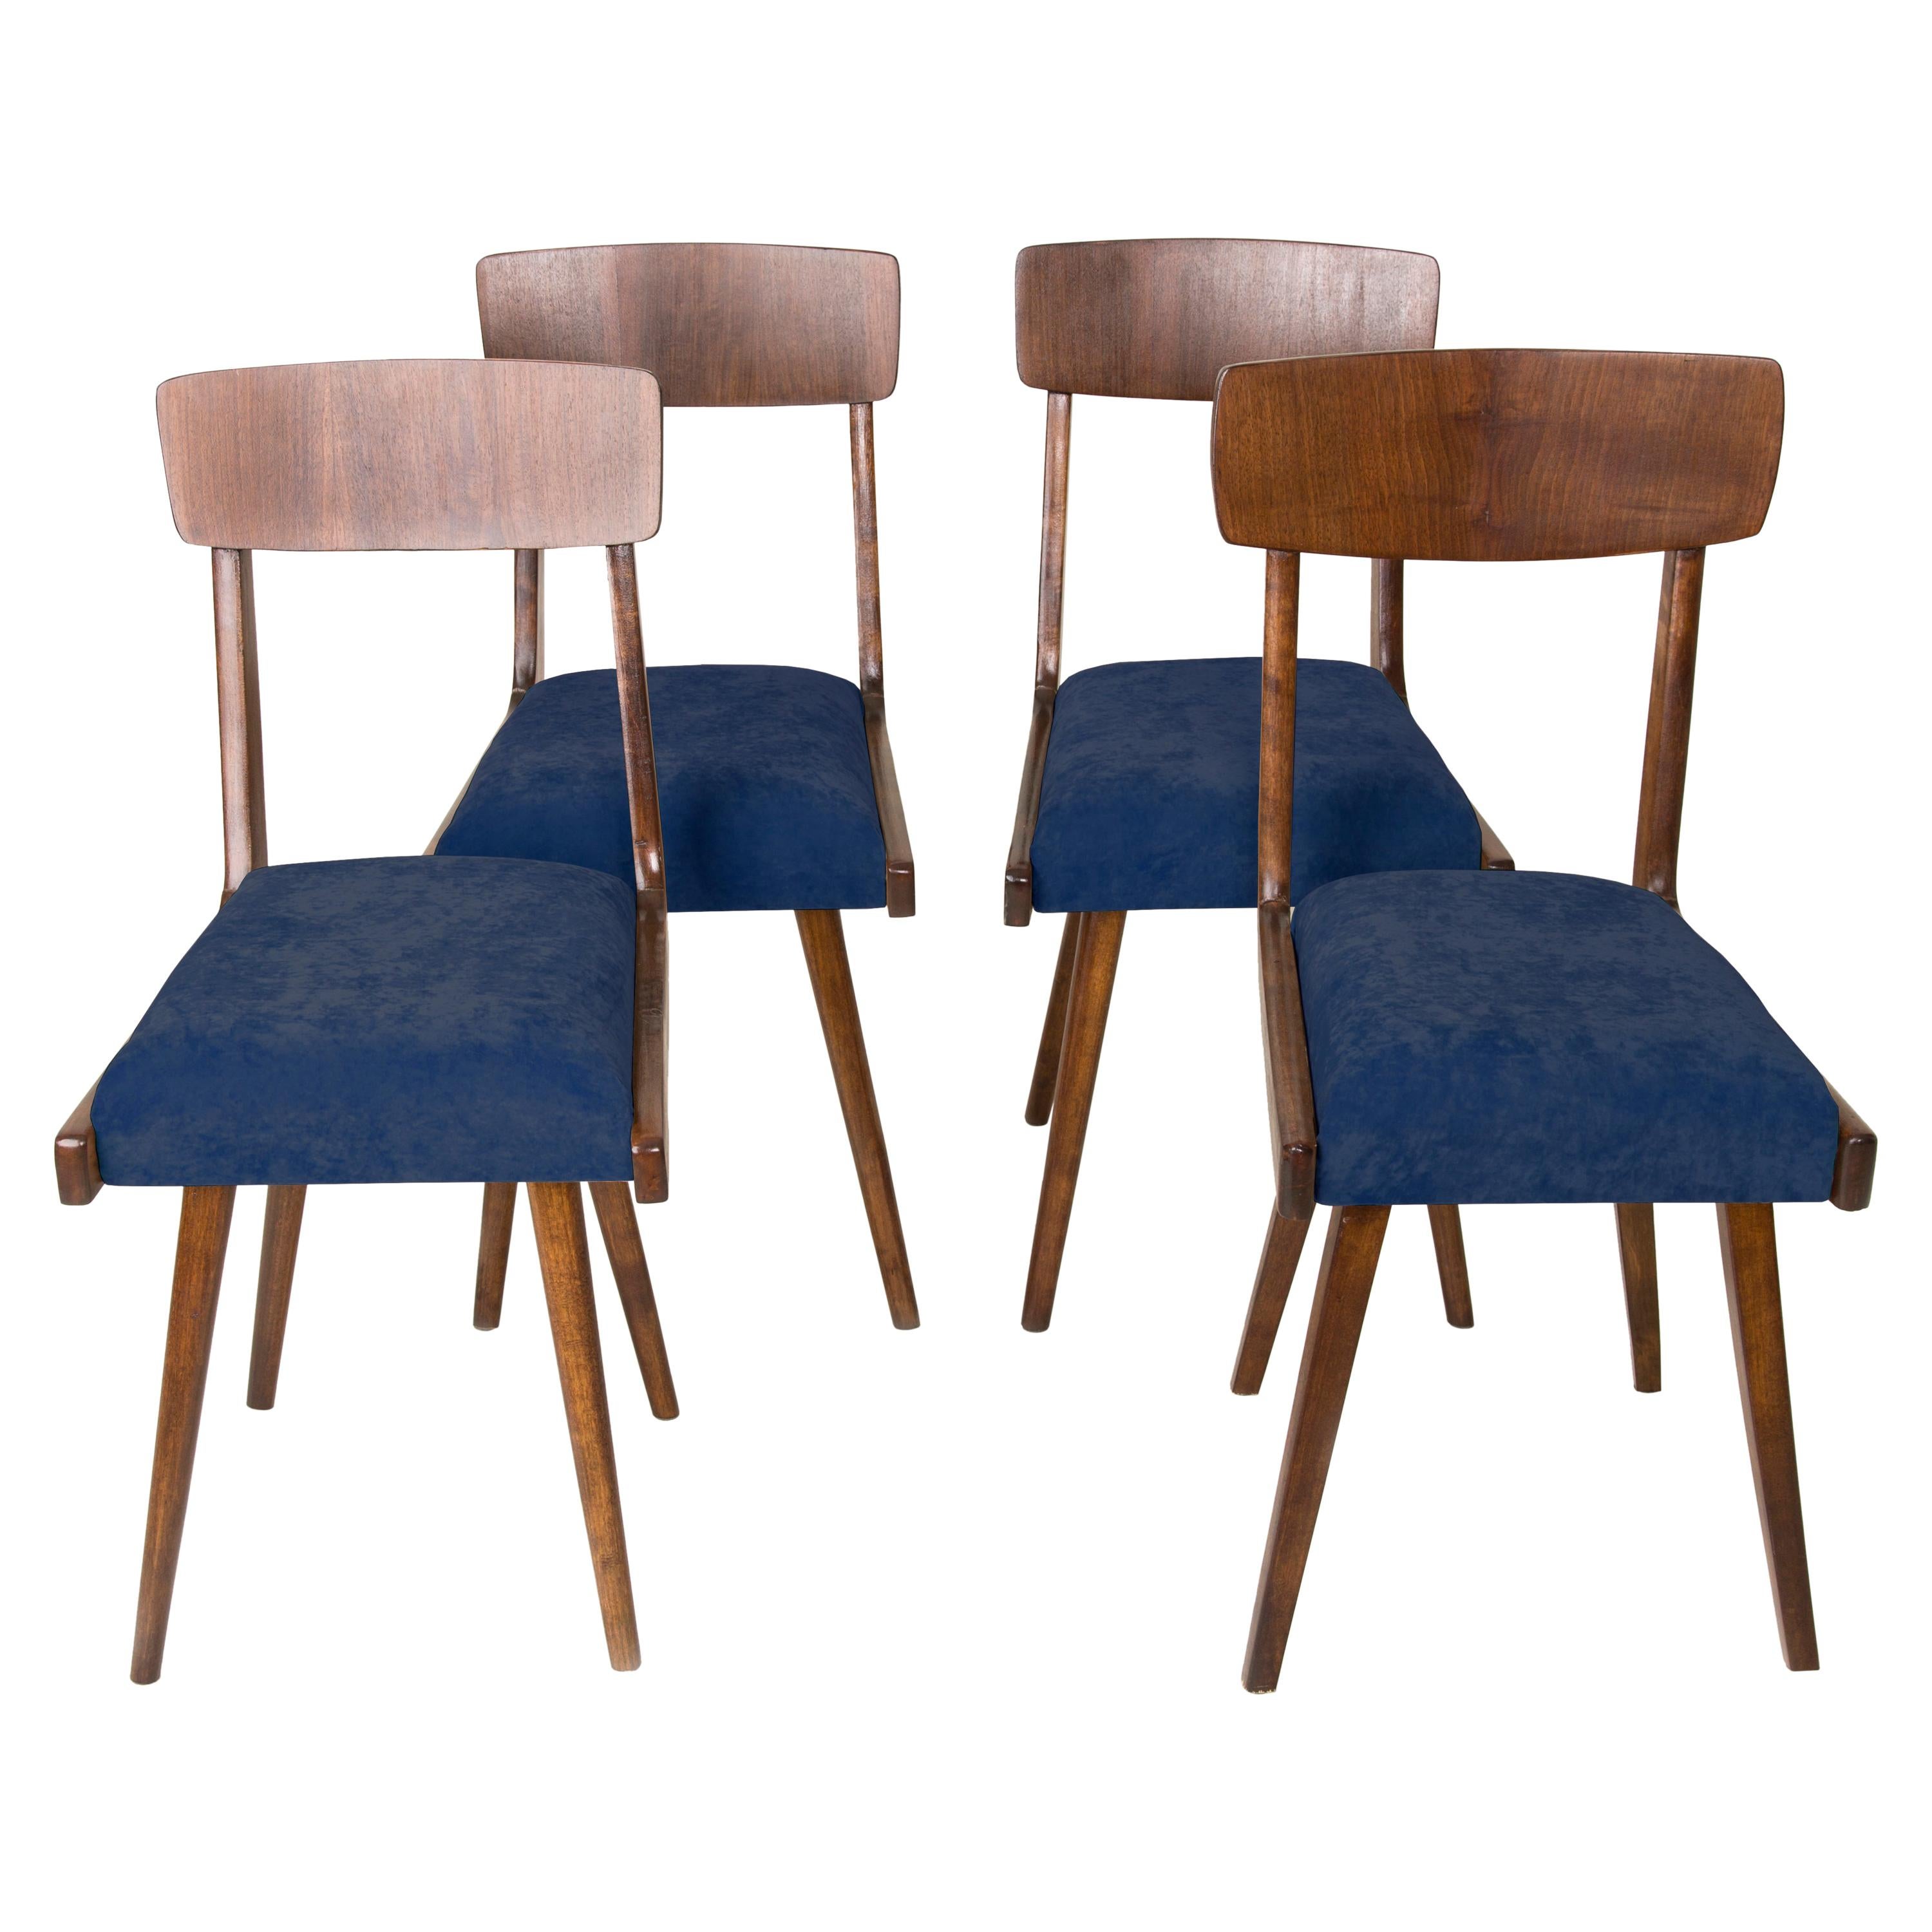 Set of Four Mid Century Navy Blue Velvet Wood Chairs, Europe, 1960s For Sale